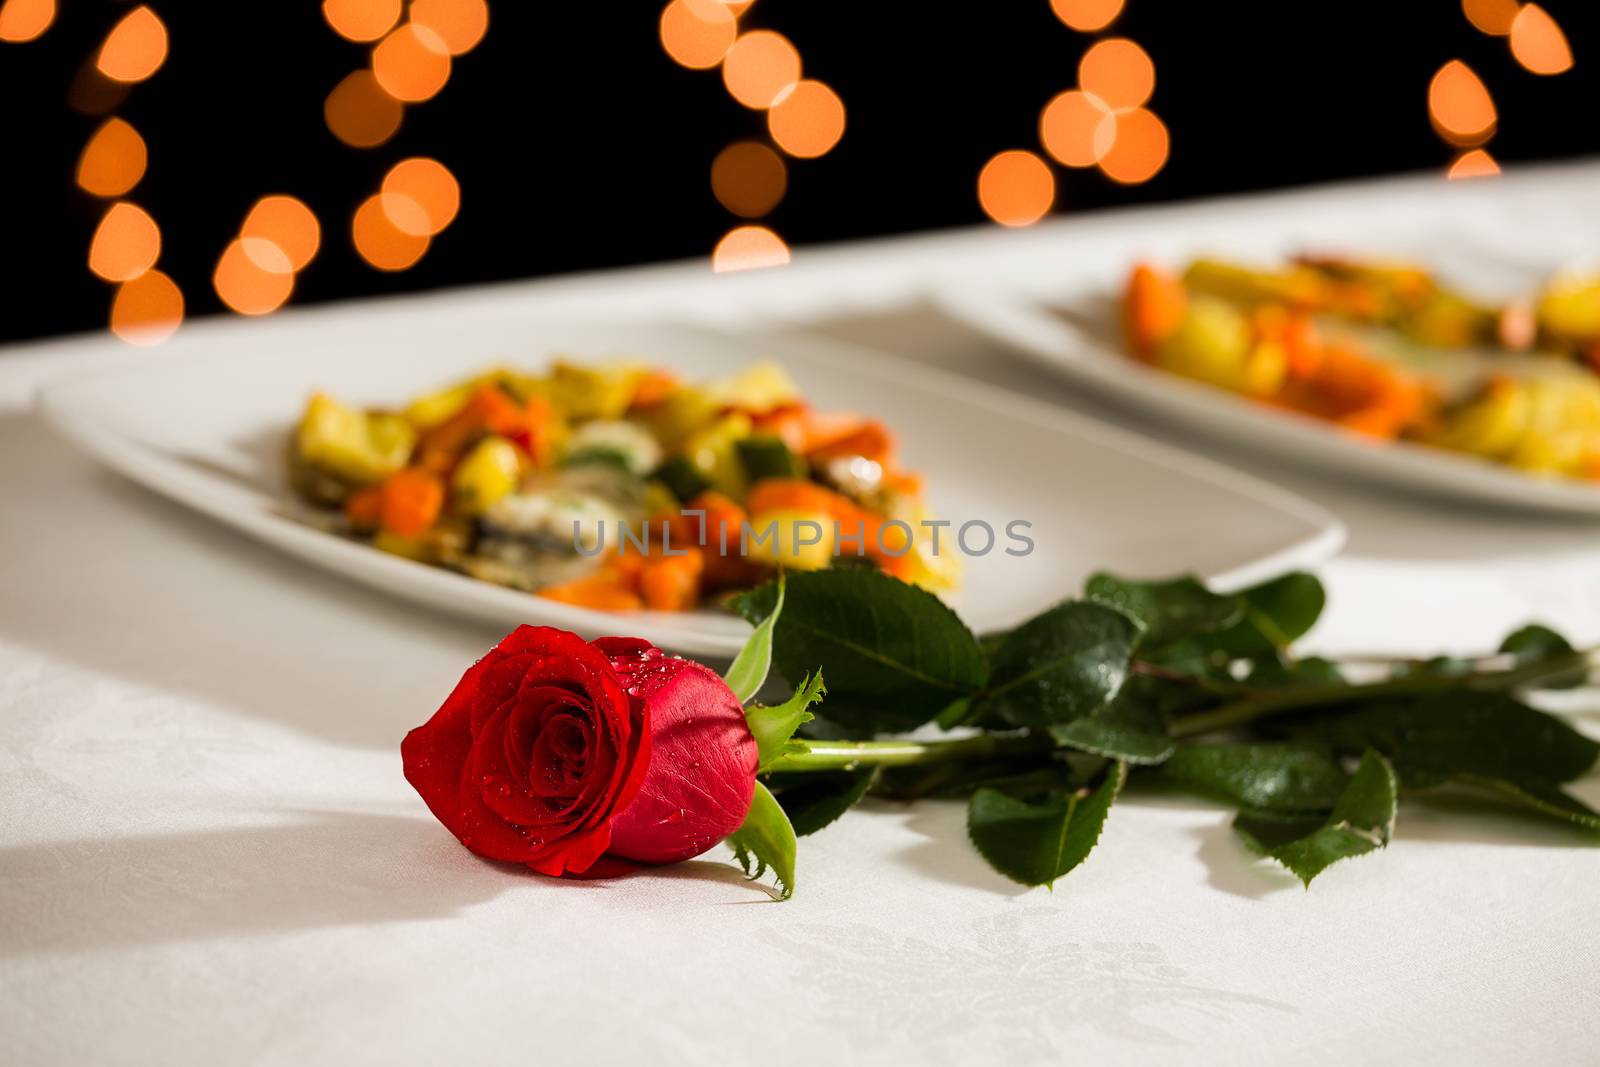 A rose to celebrate an event by LuigiMorbidelli